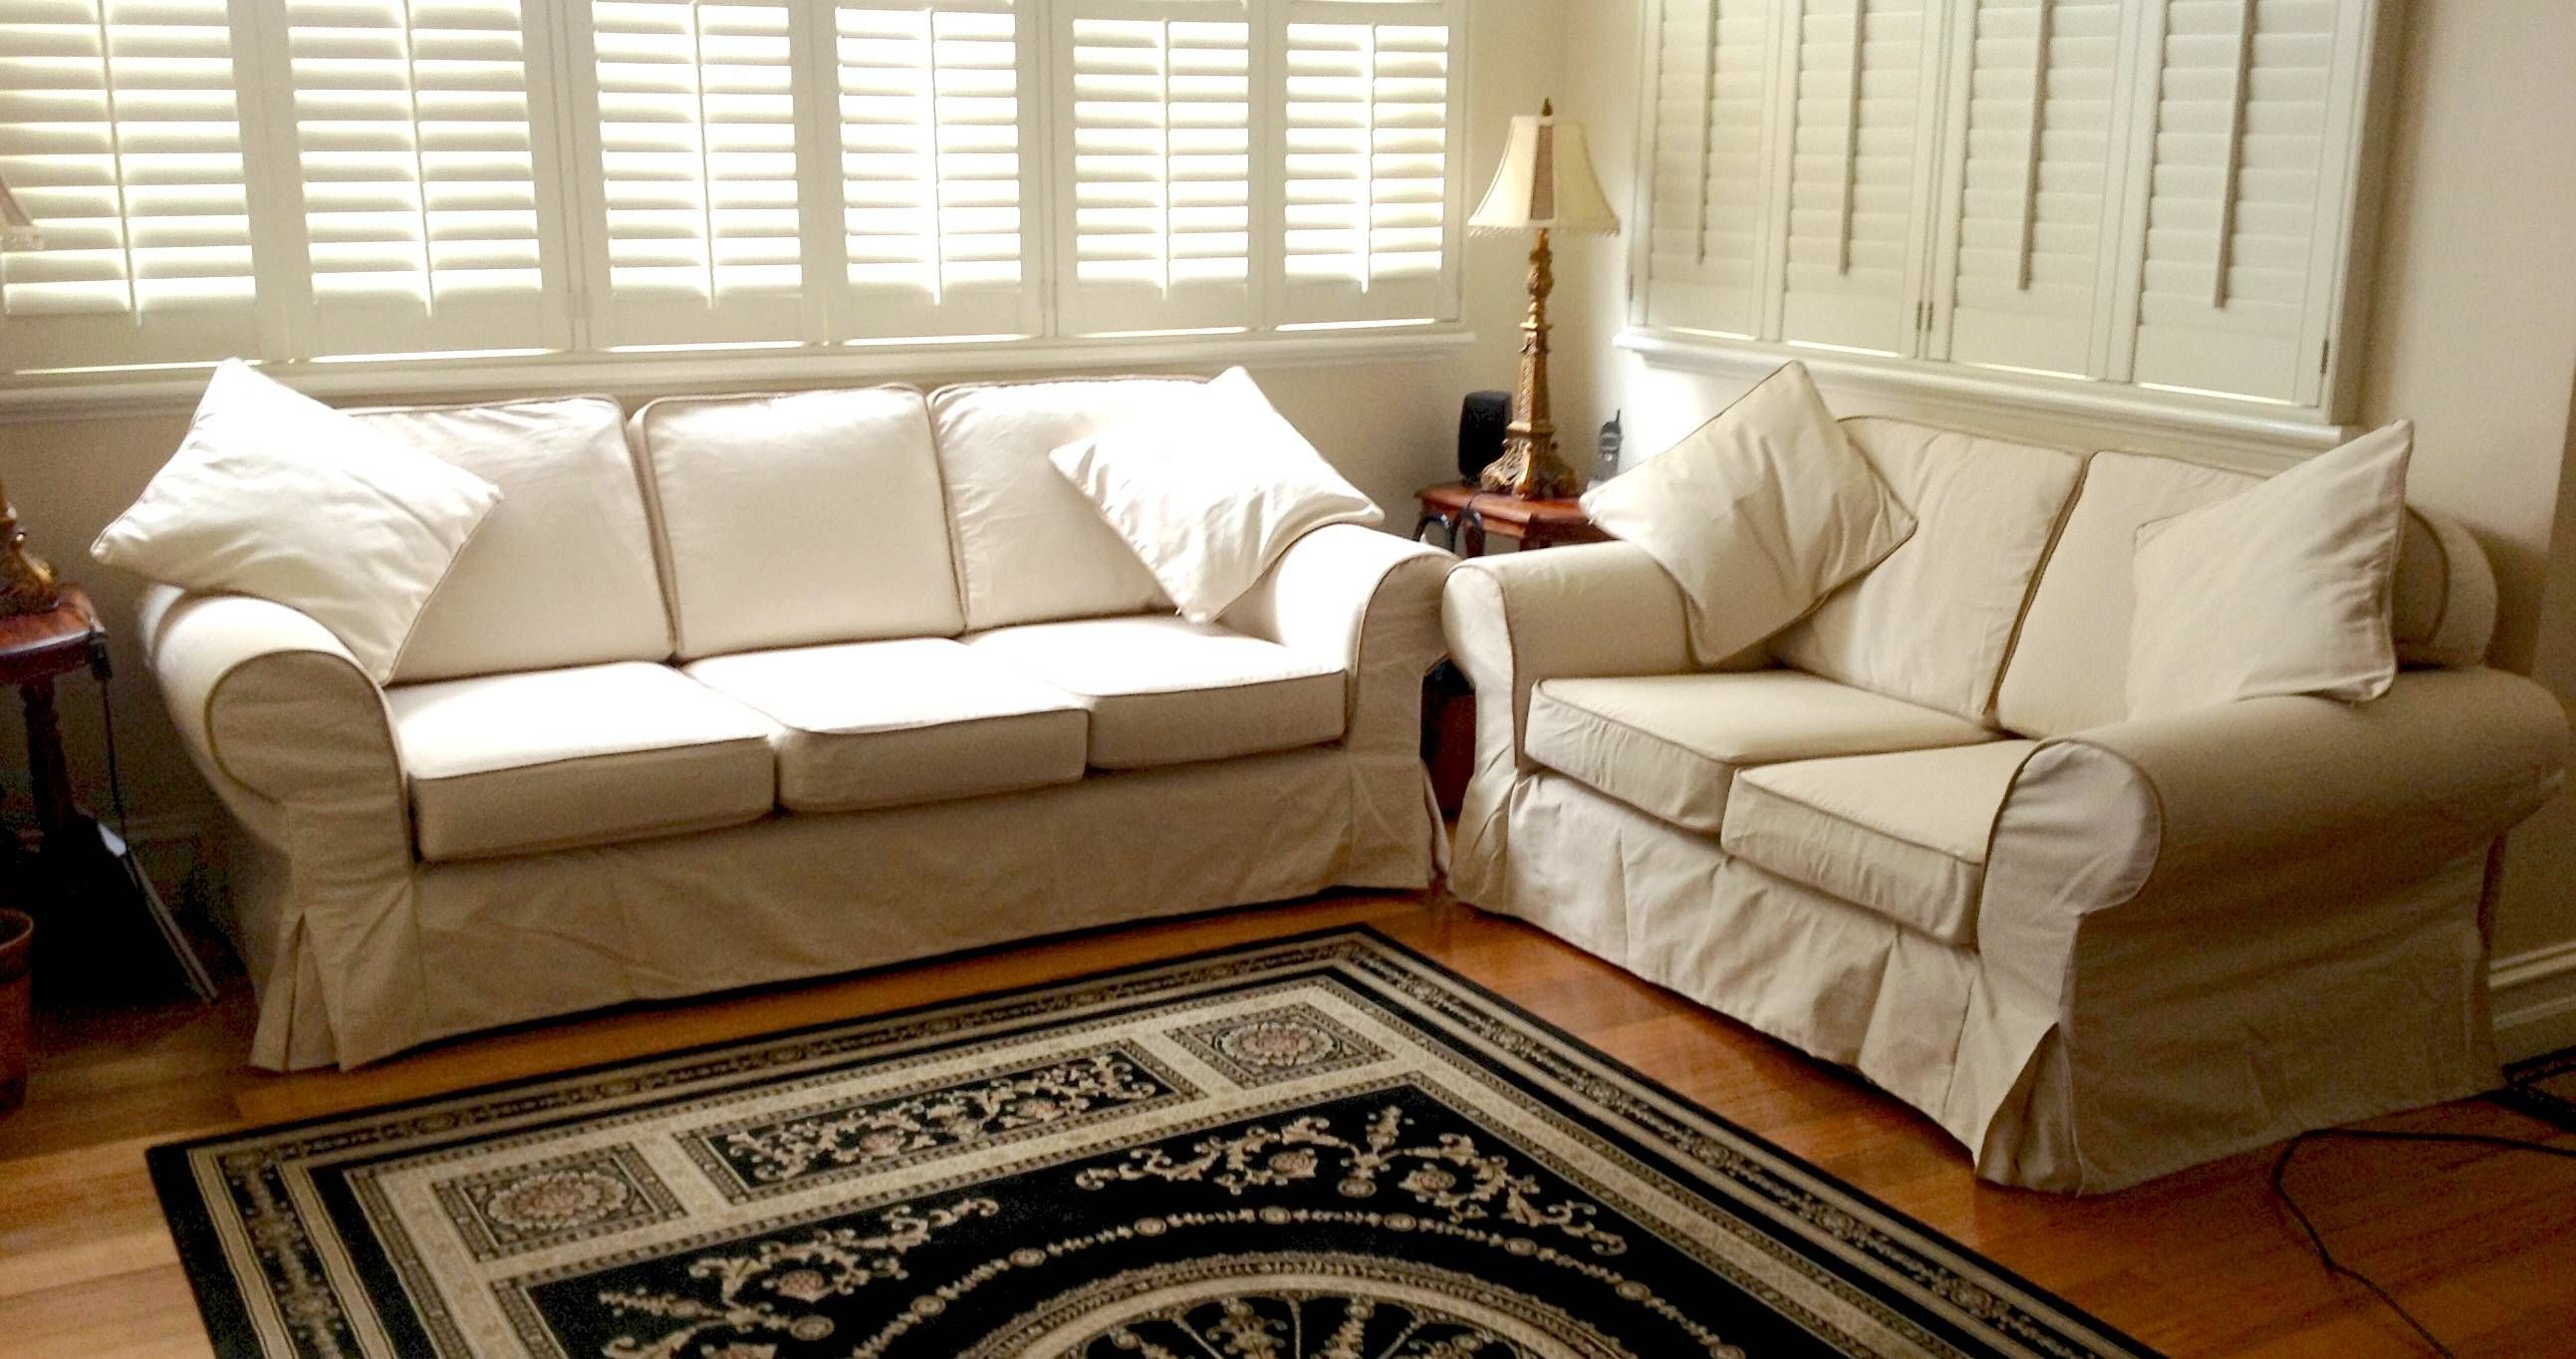 Custom Slipcovers And Couch Cover For Any Sofa Online Regarding Canvas Slipcover Sofas (View 8 of 15)